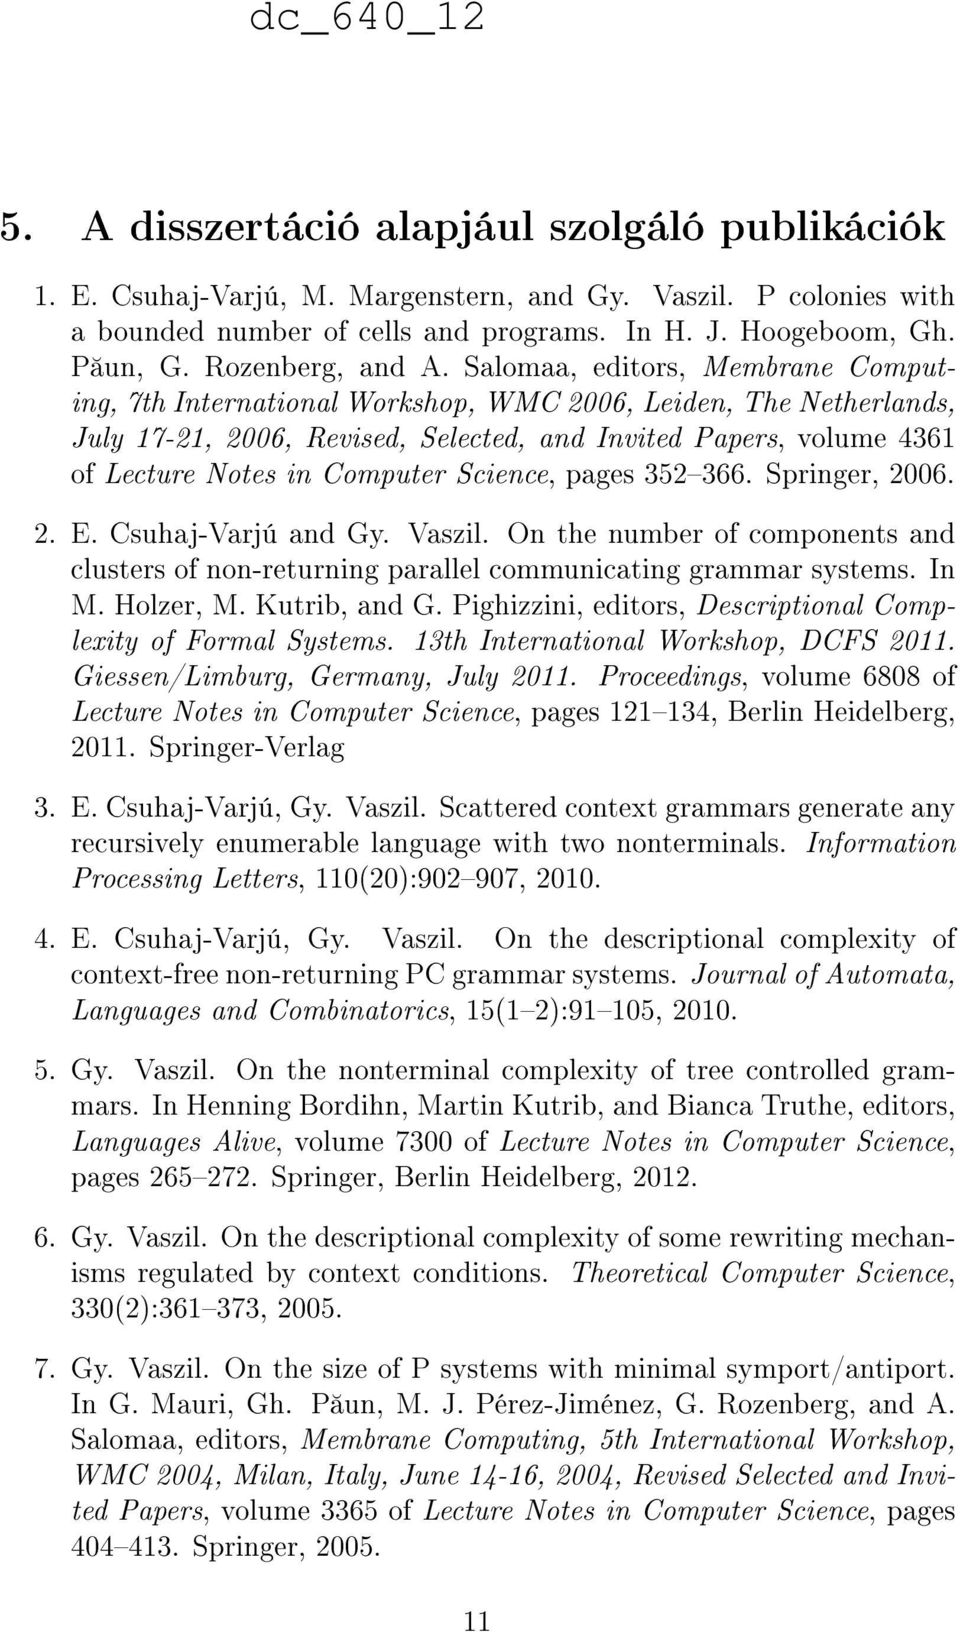 Salomaa, editors, Membrane Computing, 7th International Workshop, WMC 2006, Leiden, The Netherlands, July 17-21, 2006, Revised, Selected, and Invited Papers, volume 4361 of Lecture Notes in Computer